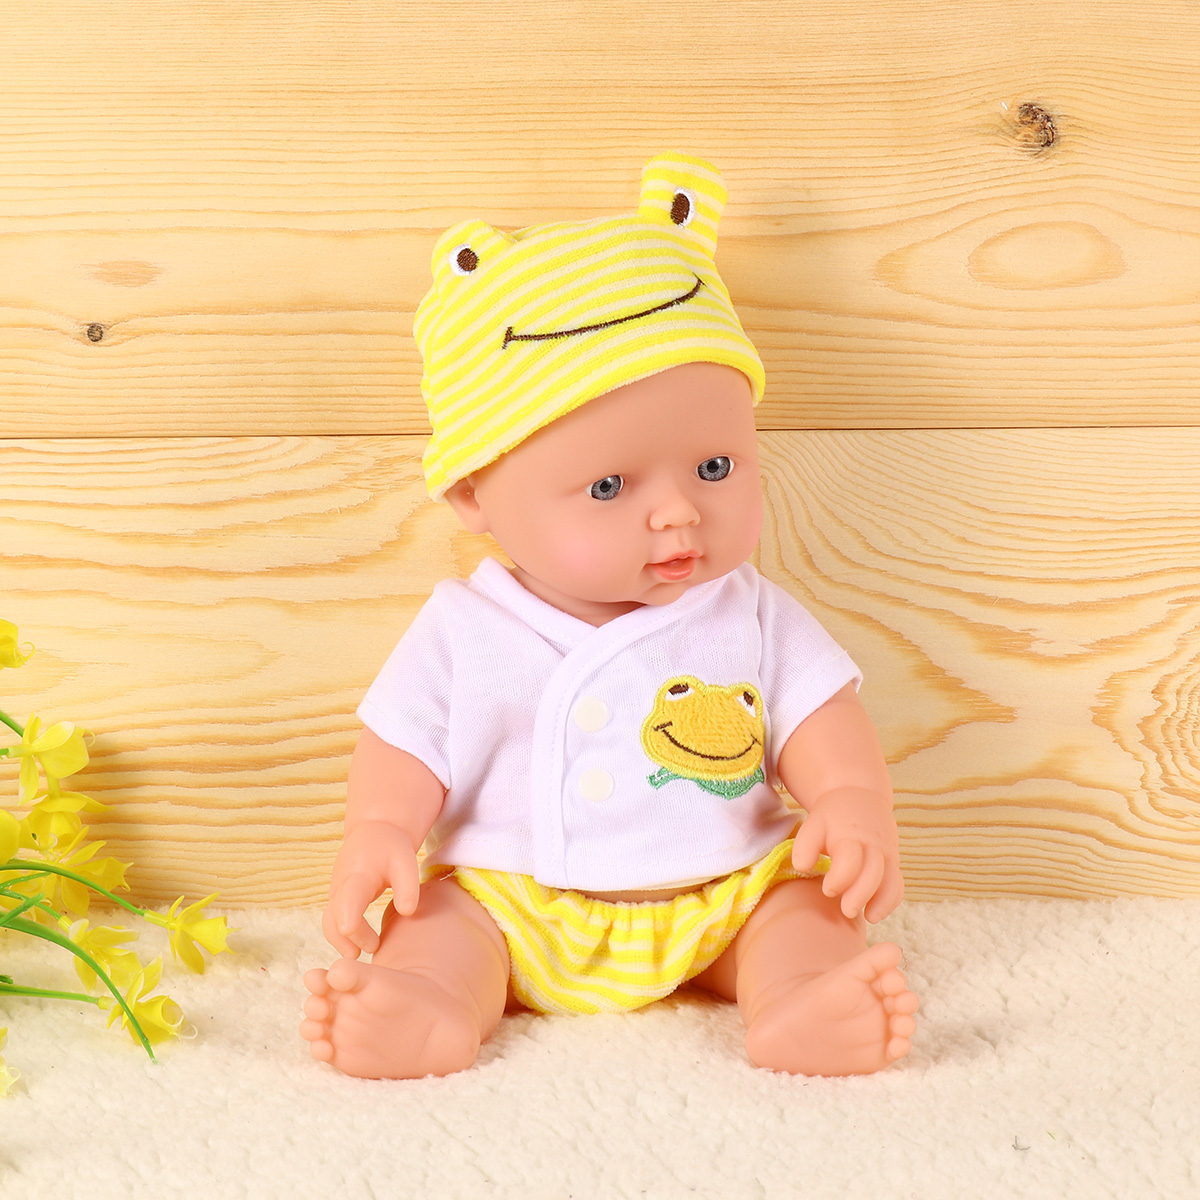 30CM-Height-Simulation-Soft-Silicone-Vinyl-Joint-Removable-Washable-Reborn-Baby-Doll-Toy-for-Kids-Bi-1812138-8